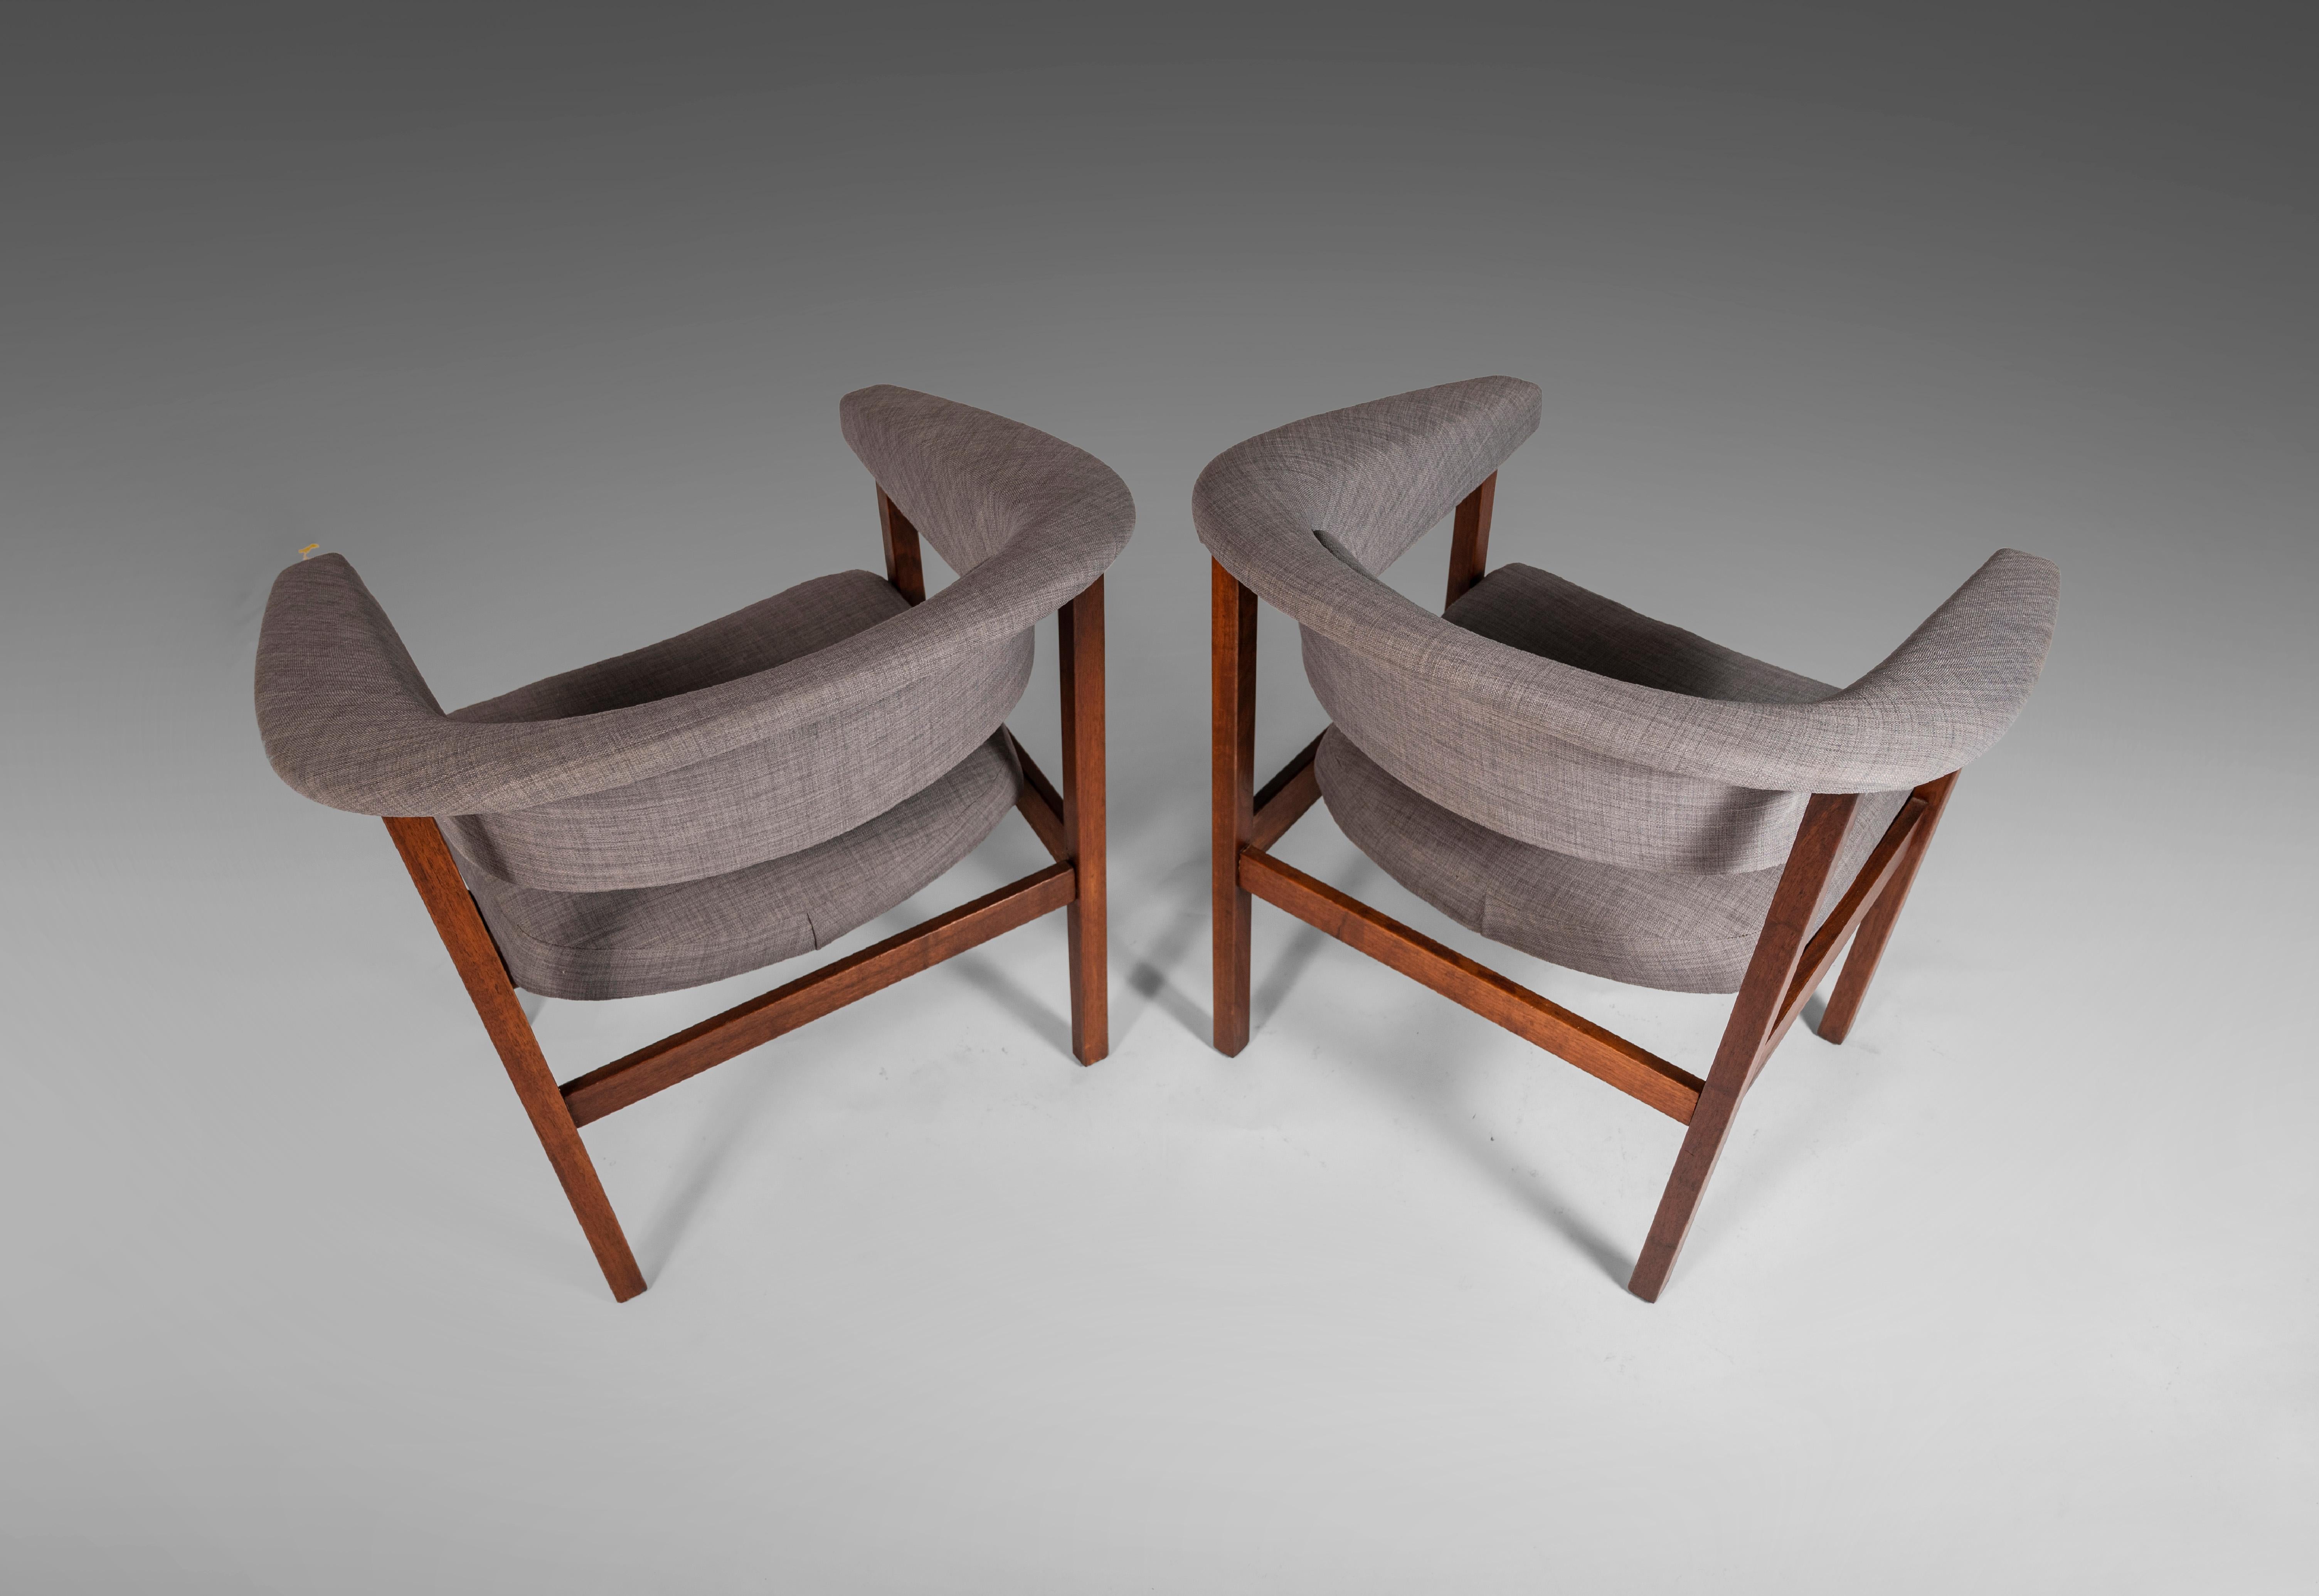 Pair of Chairs by Arthur Umanoff for Madison in Original Knit Fabric, c. 1960s For Sale 4